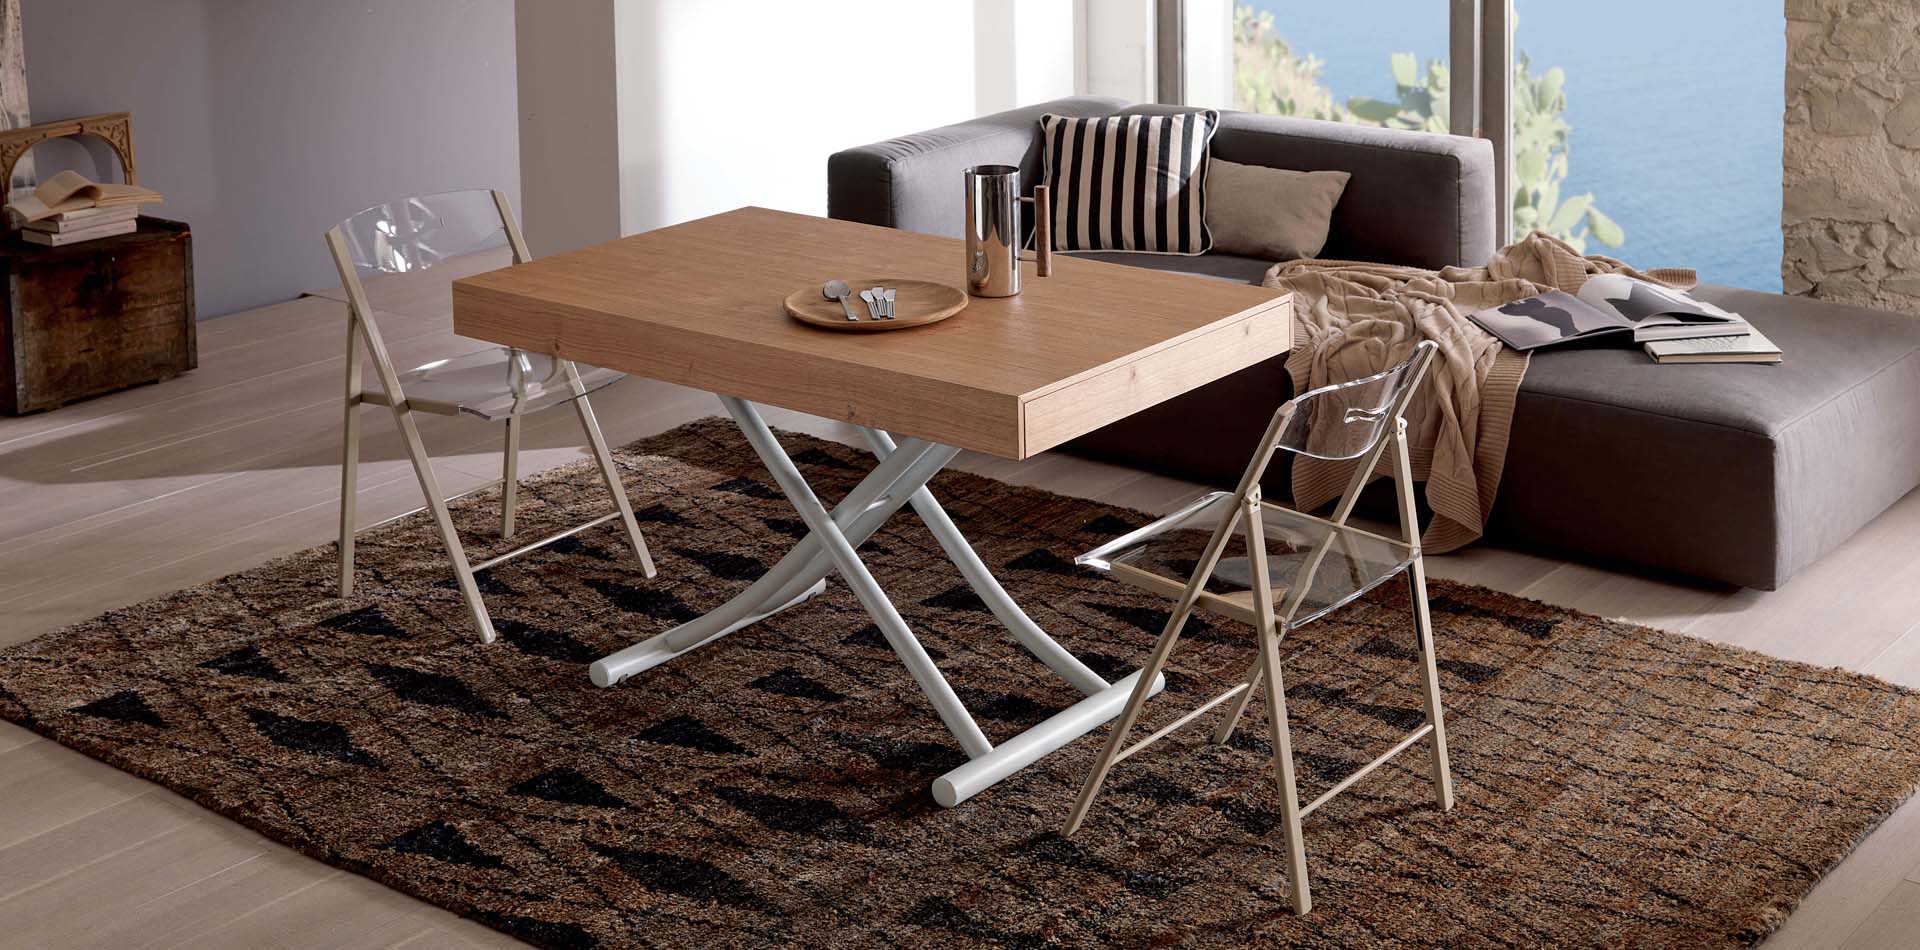 Transformable Tables